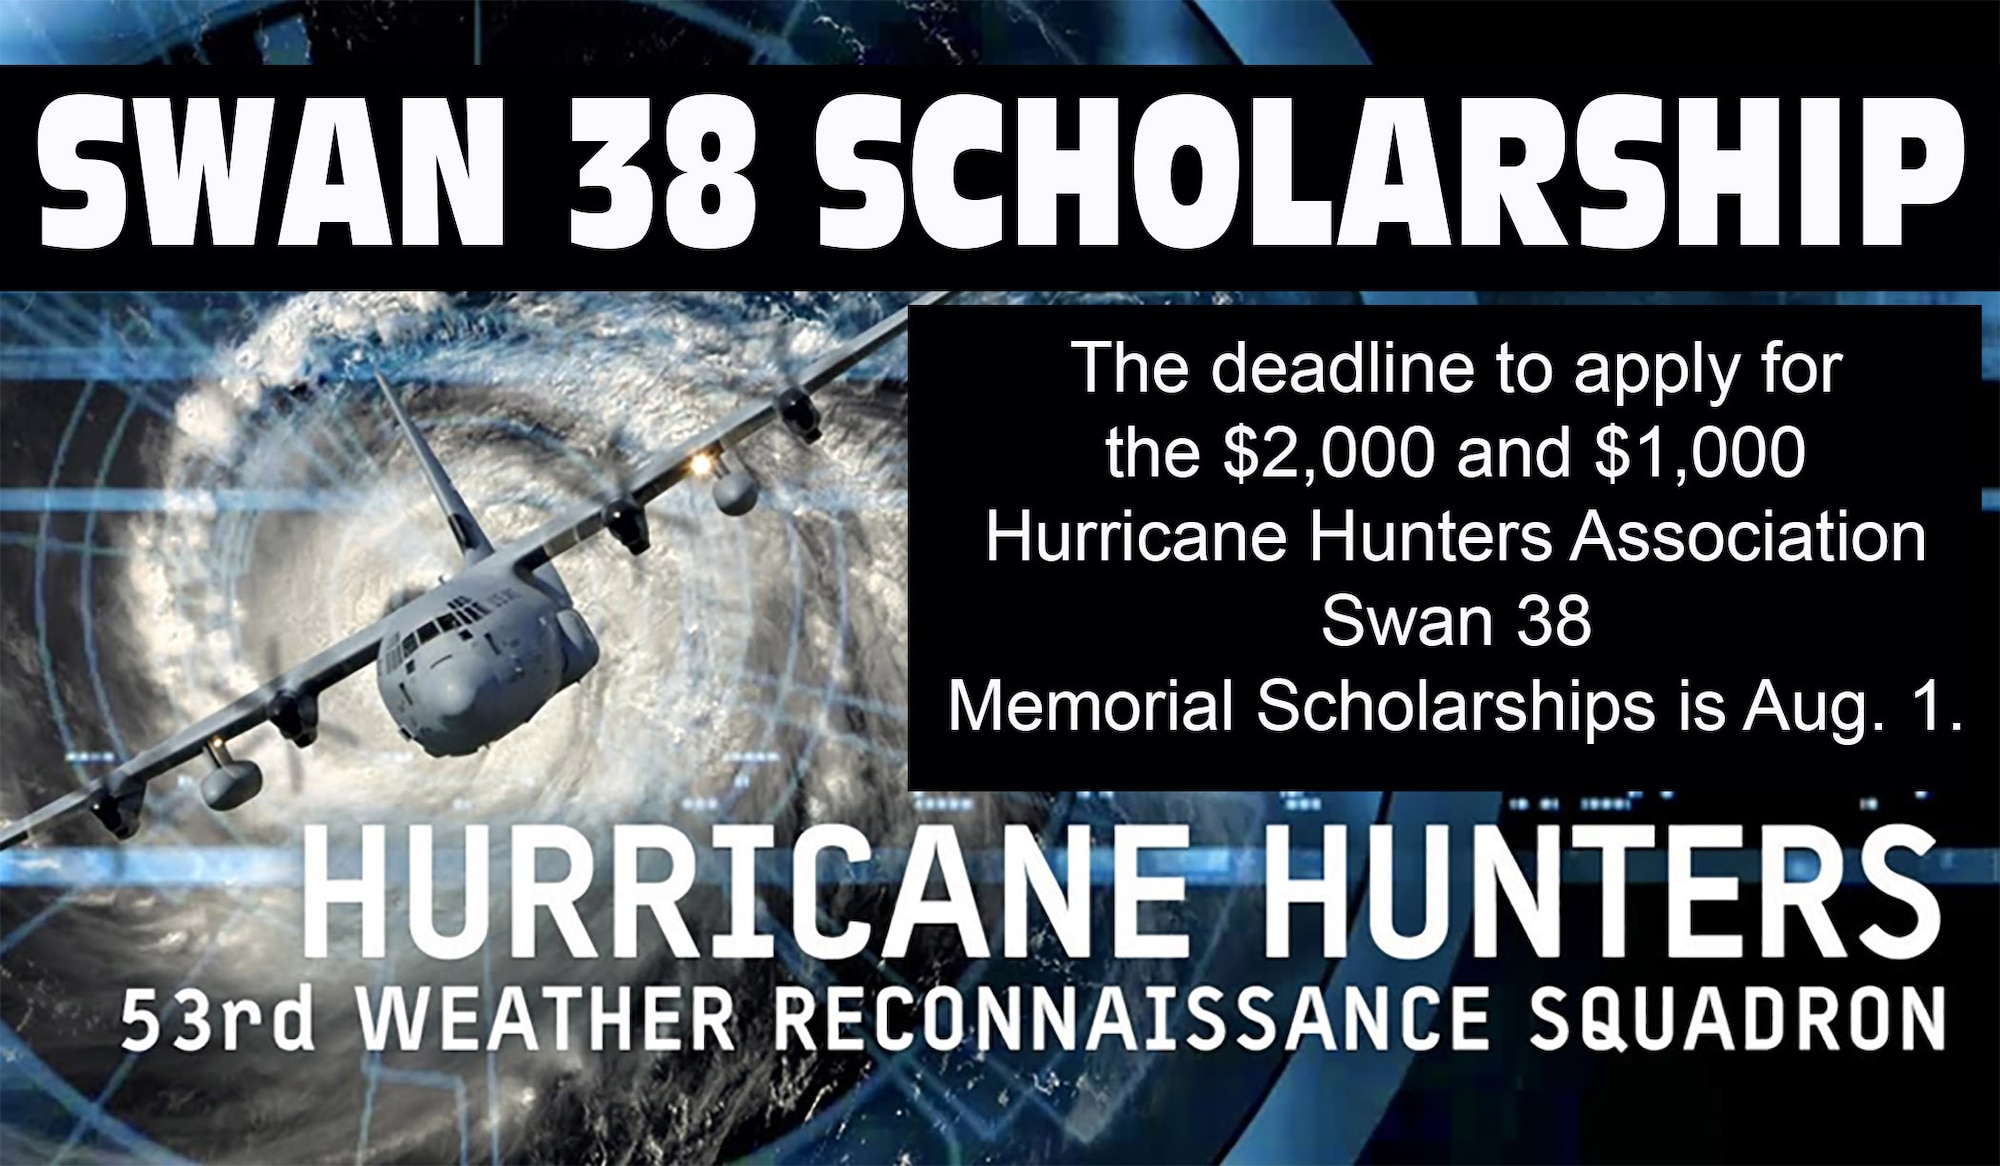 Swan 38 Scholarship. The deadline to apply for the $2,000 and $1,000 Hurricane Hunters Association Swan 38 Memorial Scholarships is Aug. 1. Hurricane Hunters. 53rd Weather Reconnaissance Squadron